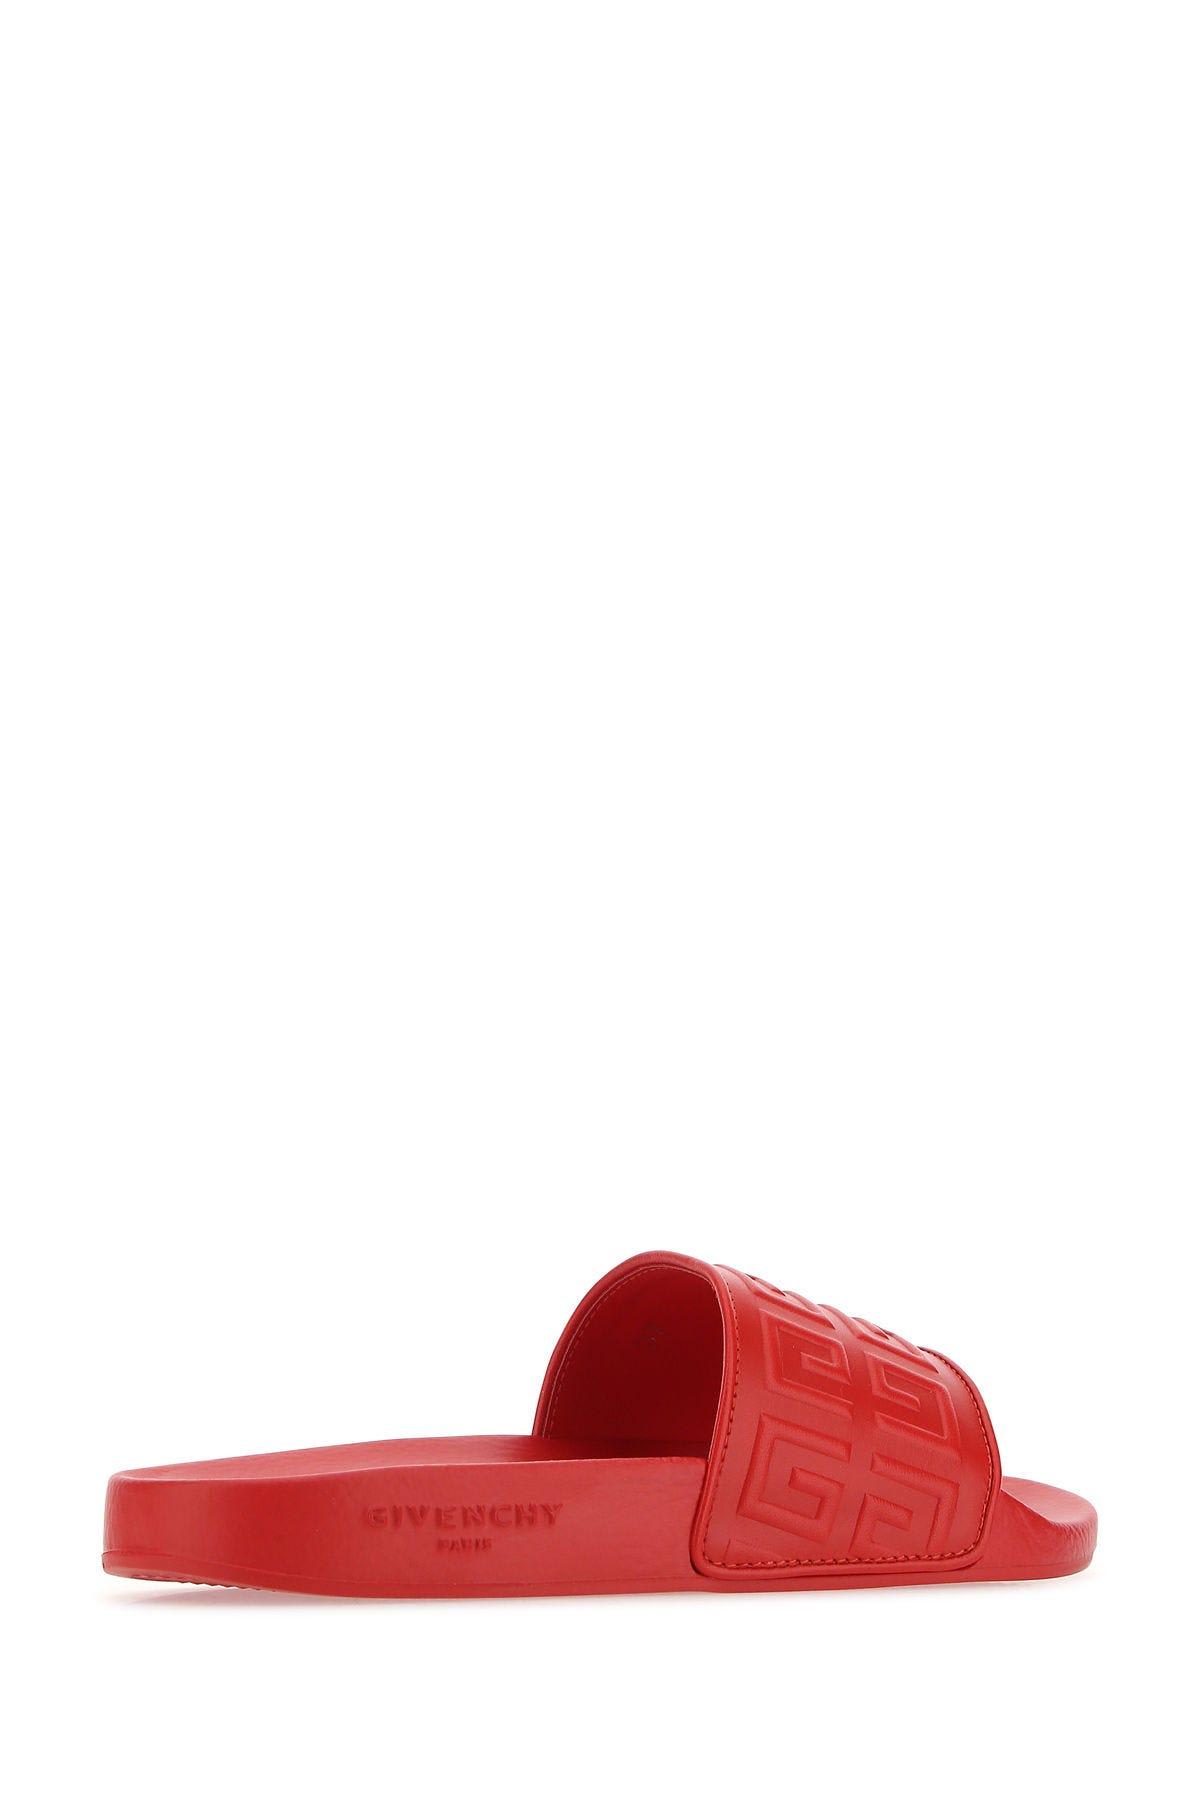 Shop Givenchy Red Leather 4g Slippers